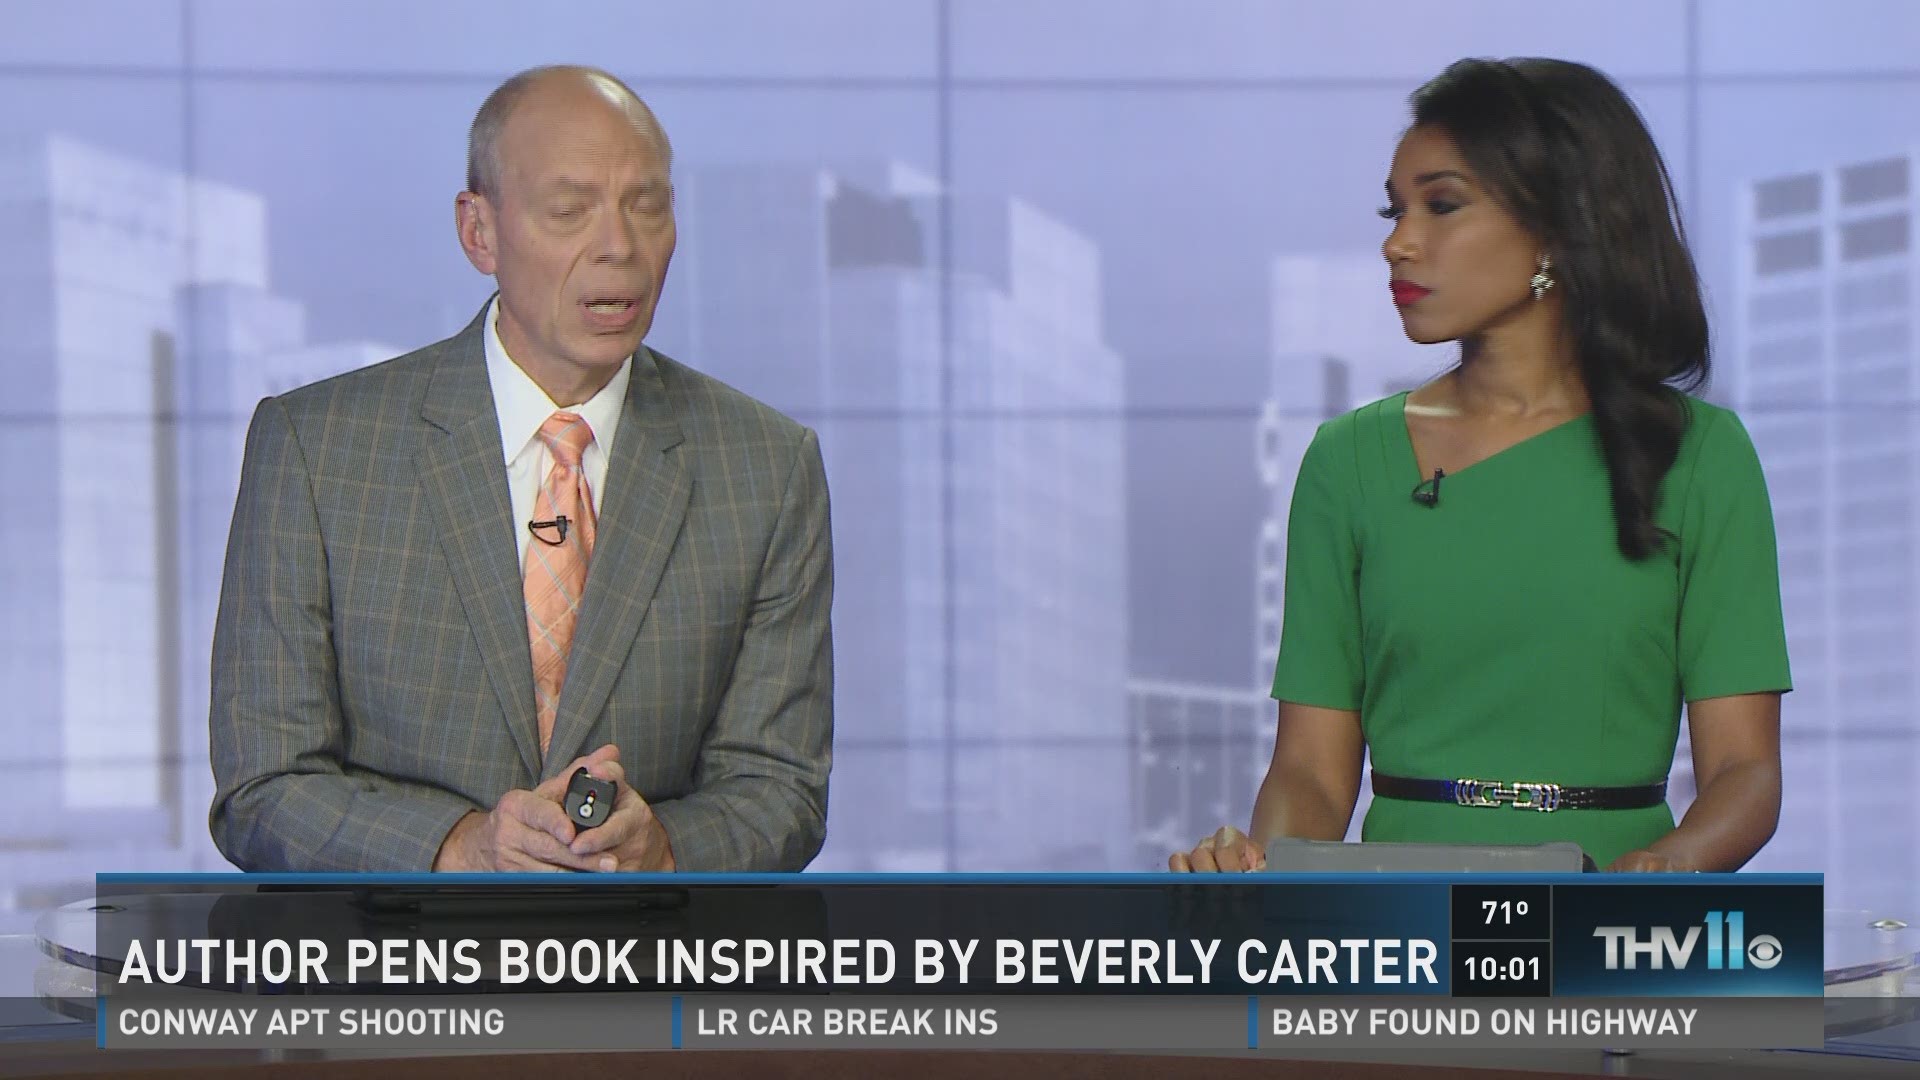 Author pens book inspired by Beverly Carter